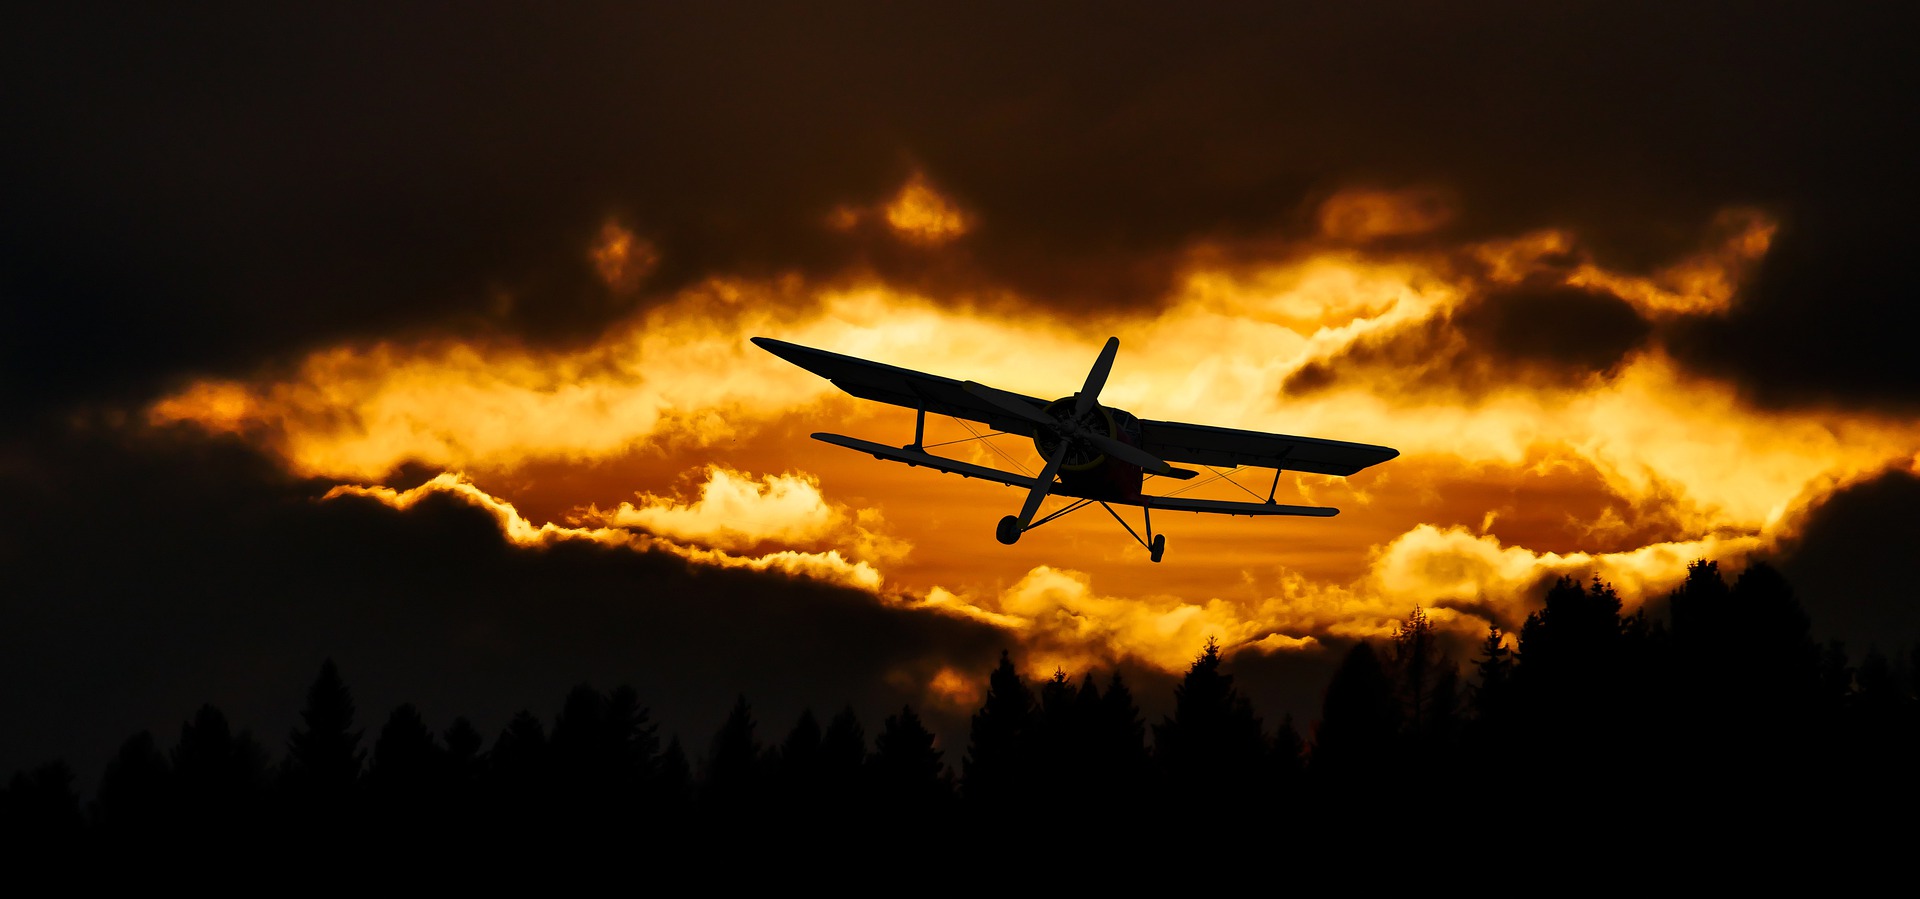 Image of a biplane flying towards clouds